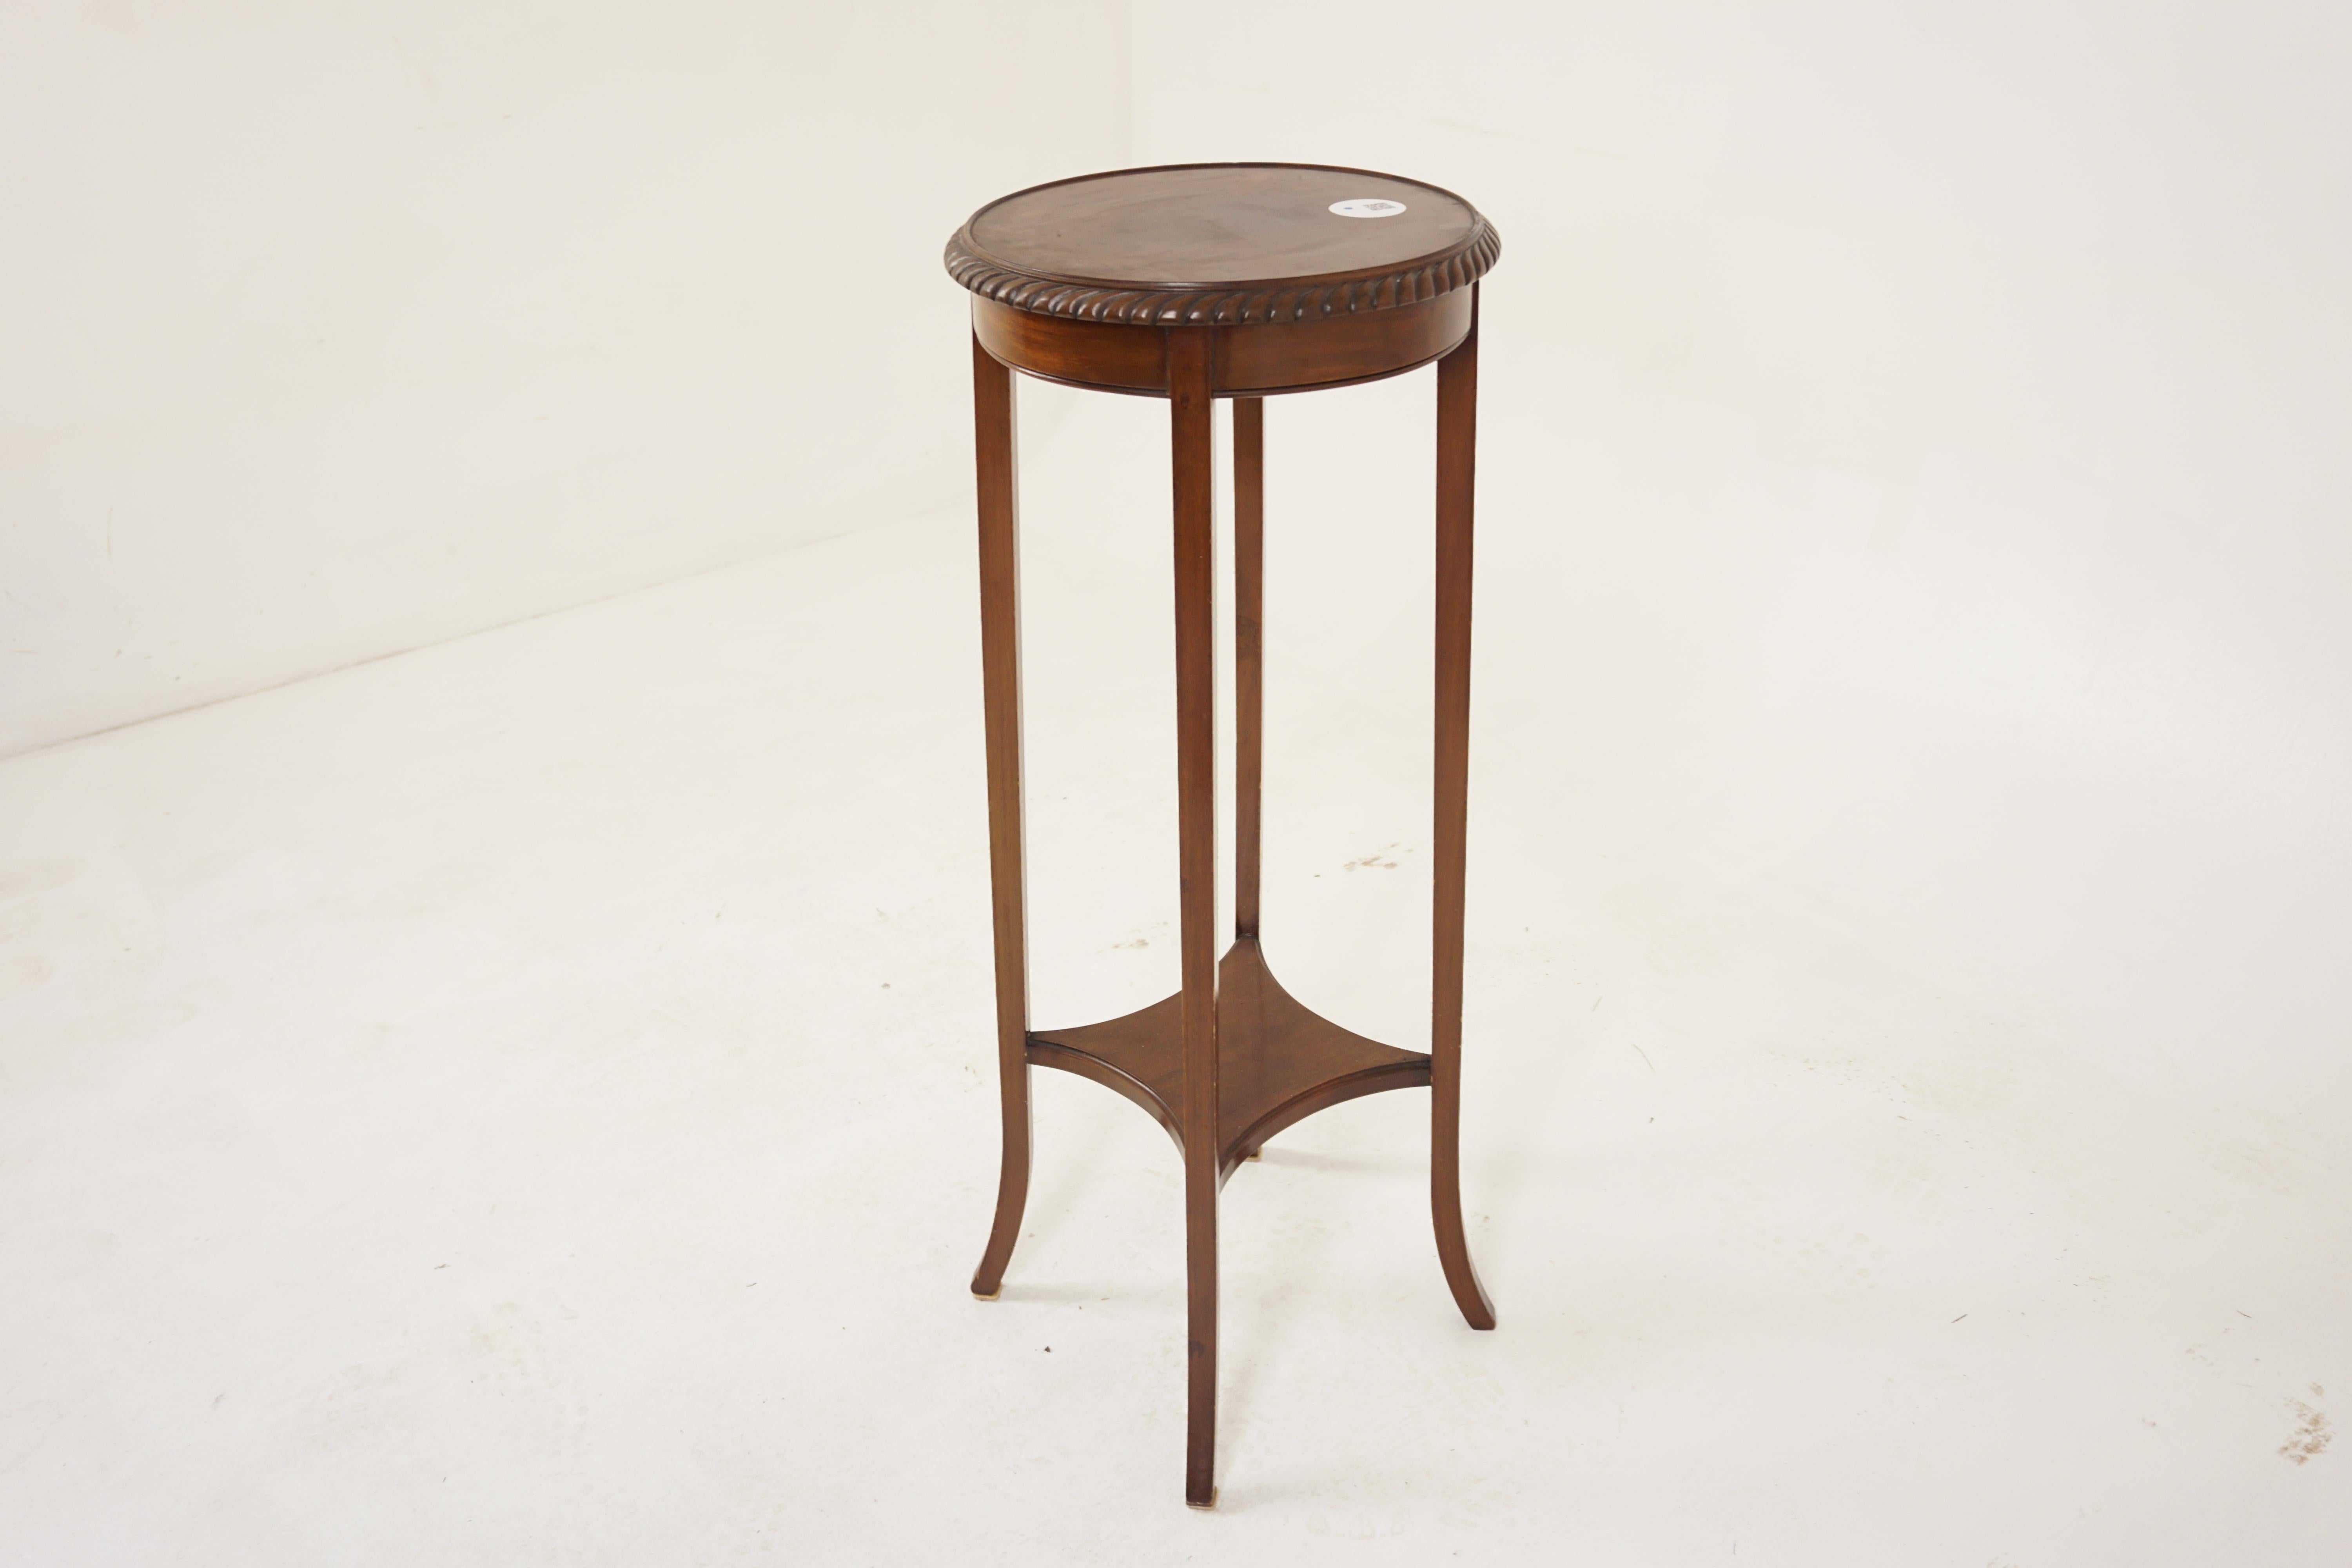 Antique Edwardian Two Tier walnut plant stand torchère, Scotland 1910, H906

Scotland, 1910
Solid Walnut
Original Finish
Circular solid top
Carved moulding edge
With shaped below
Are raised on out splayed legs
Lovely quality and in good